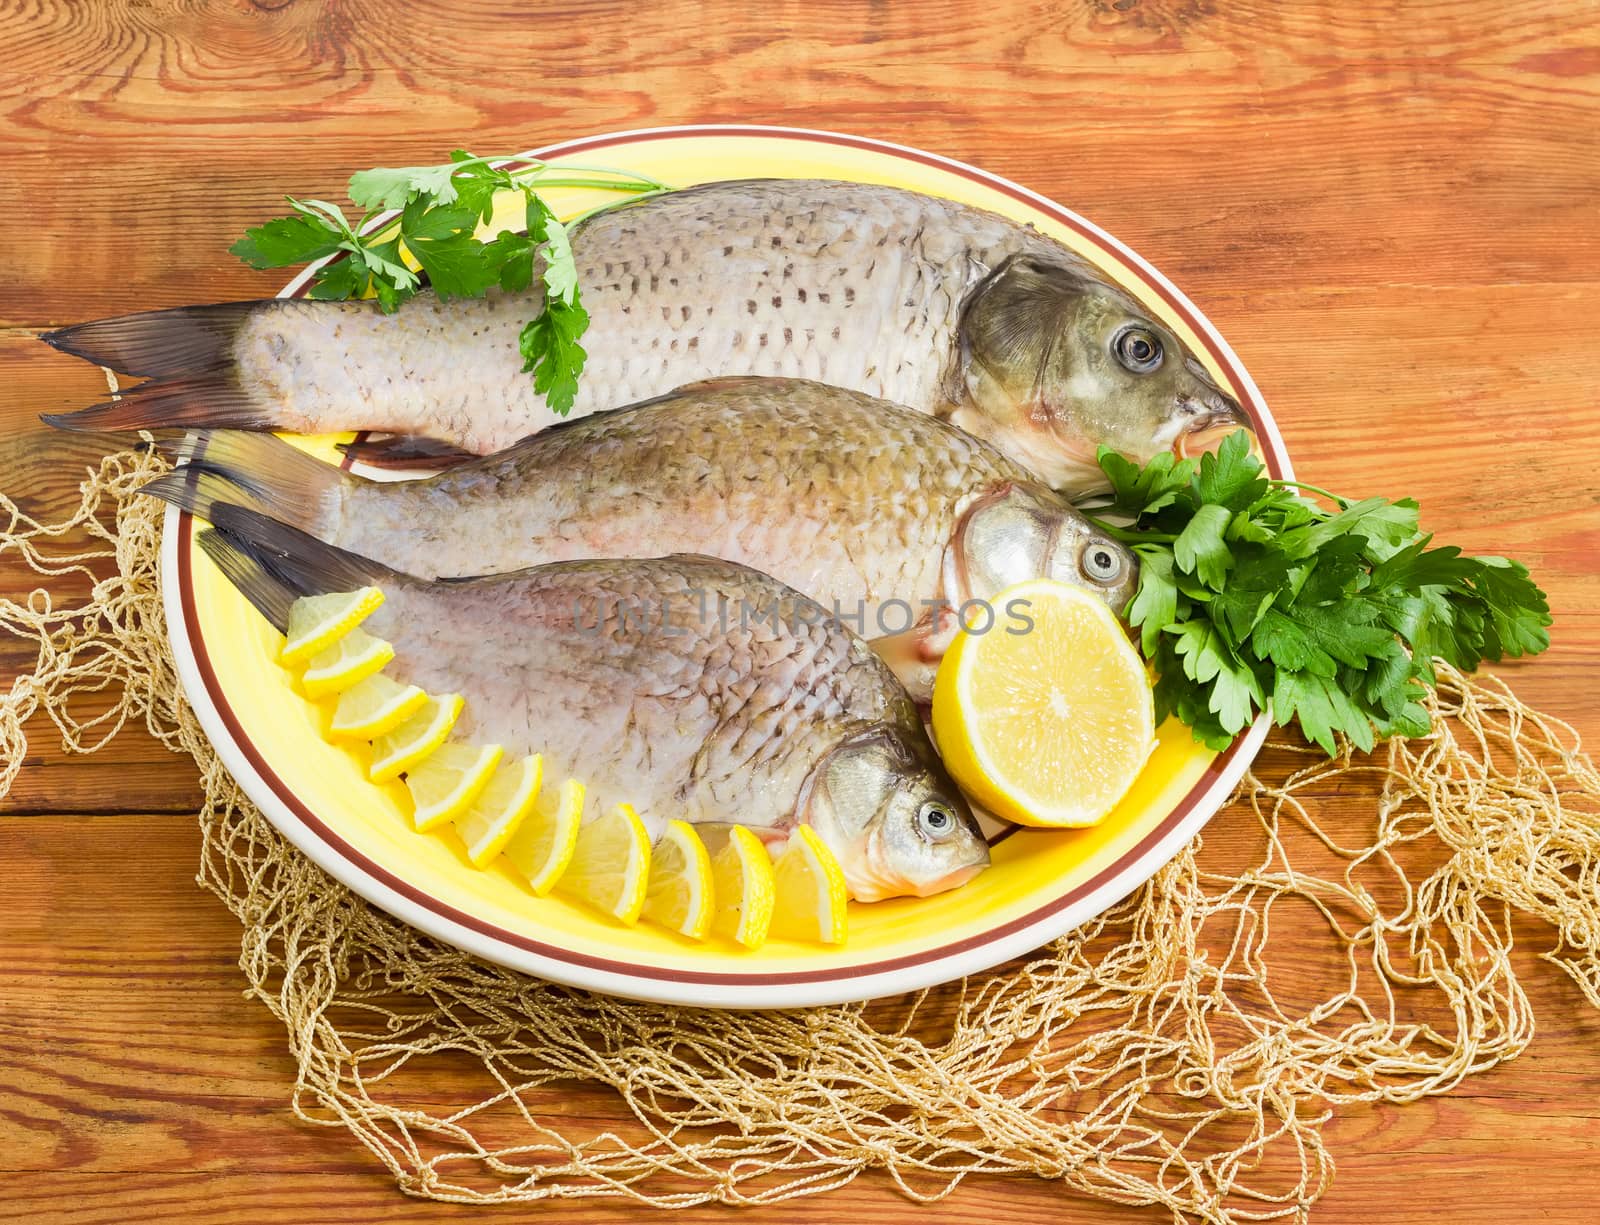 Carp and crucians prepared for cooking on dish by anmbph